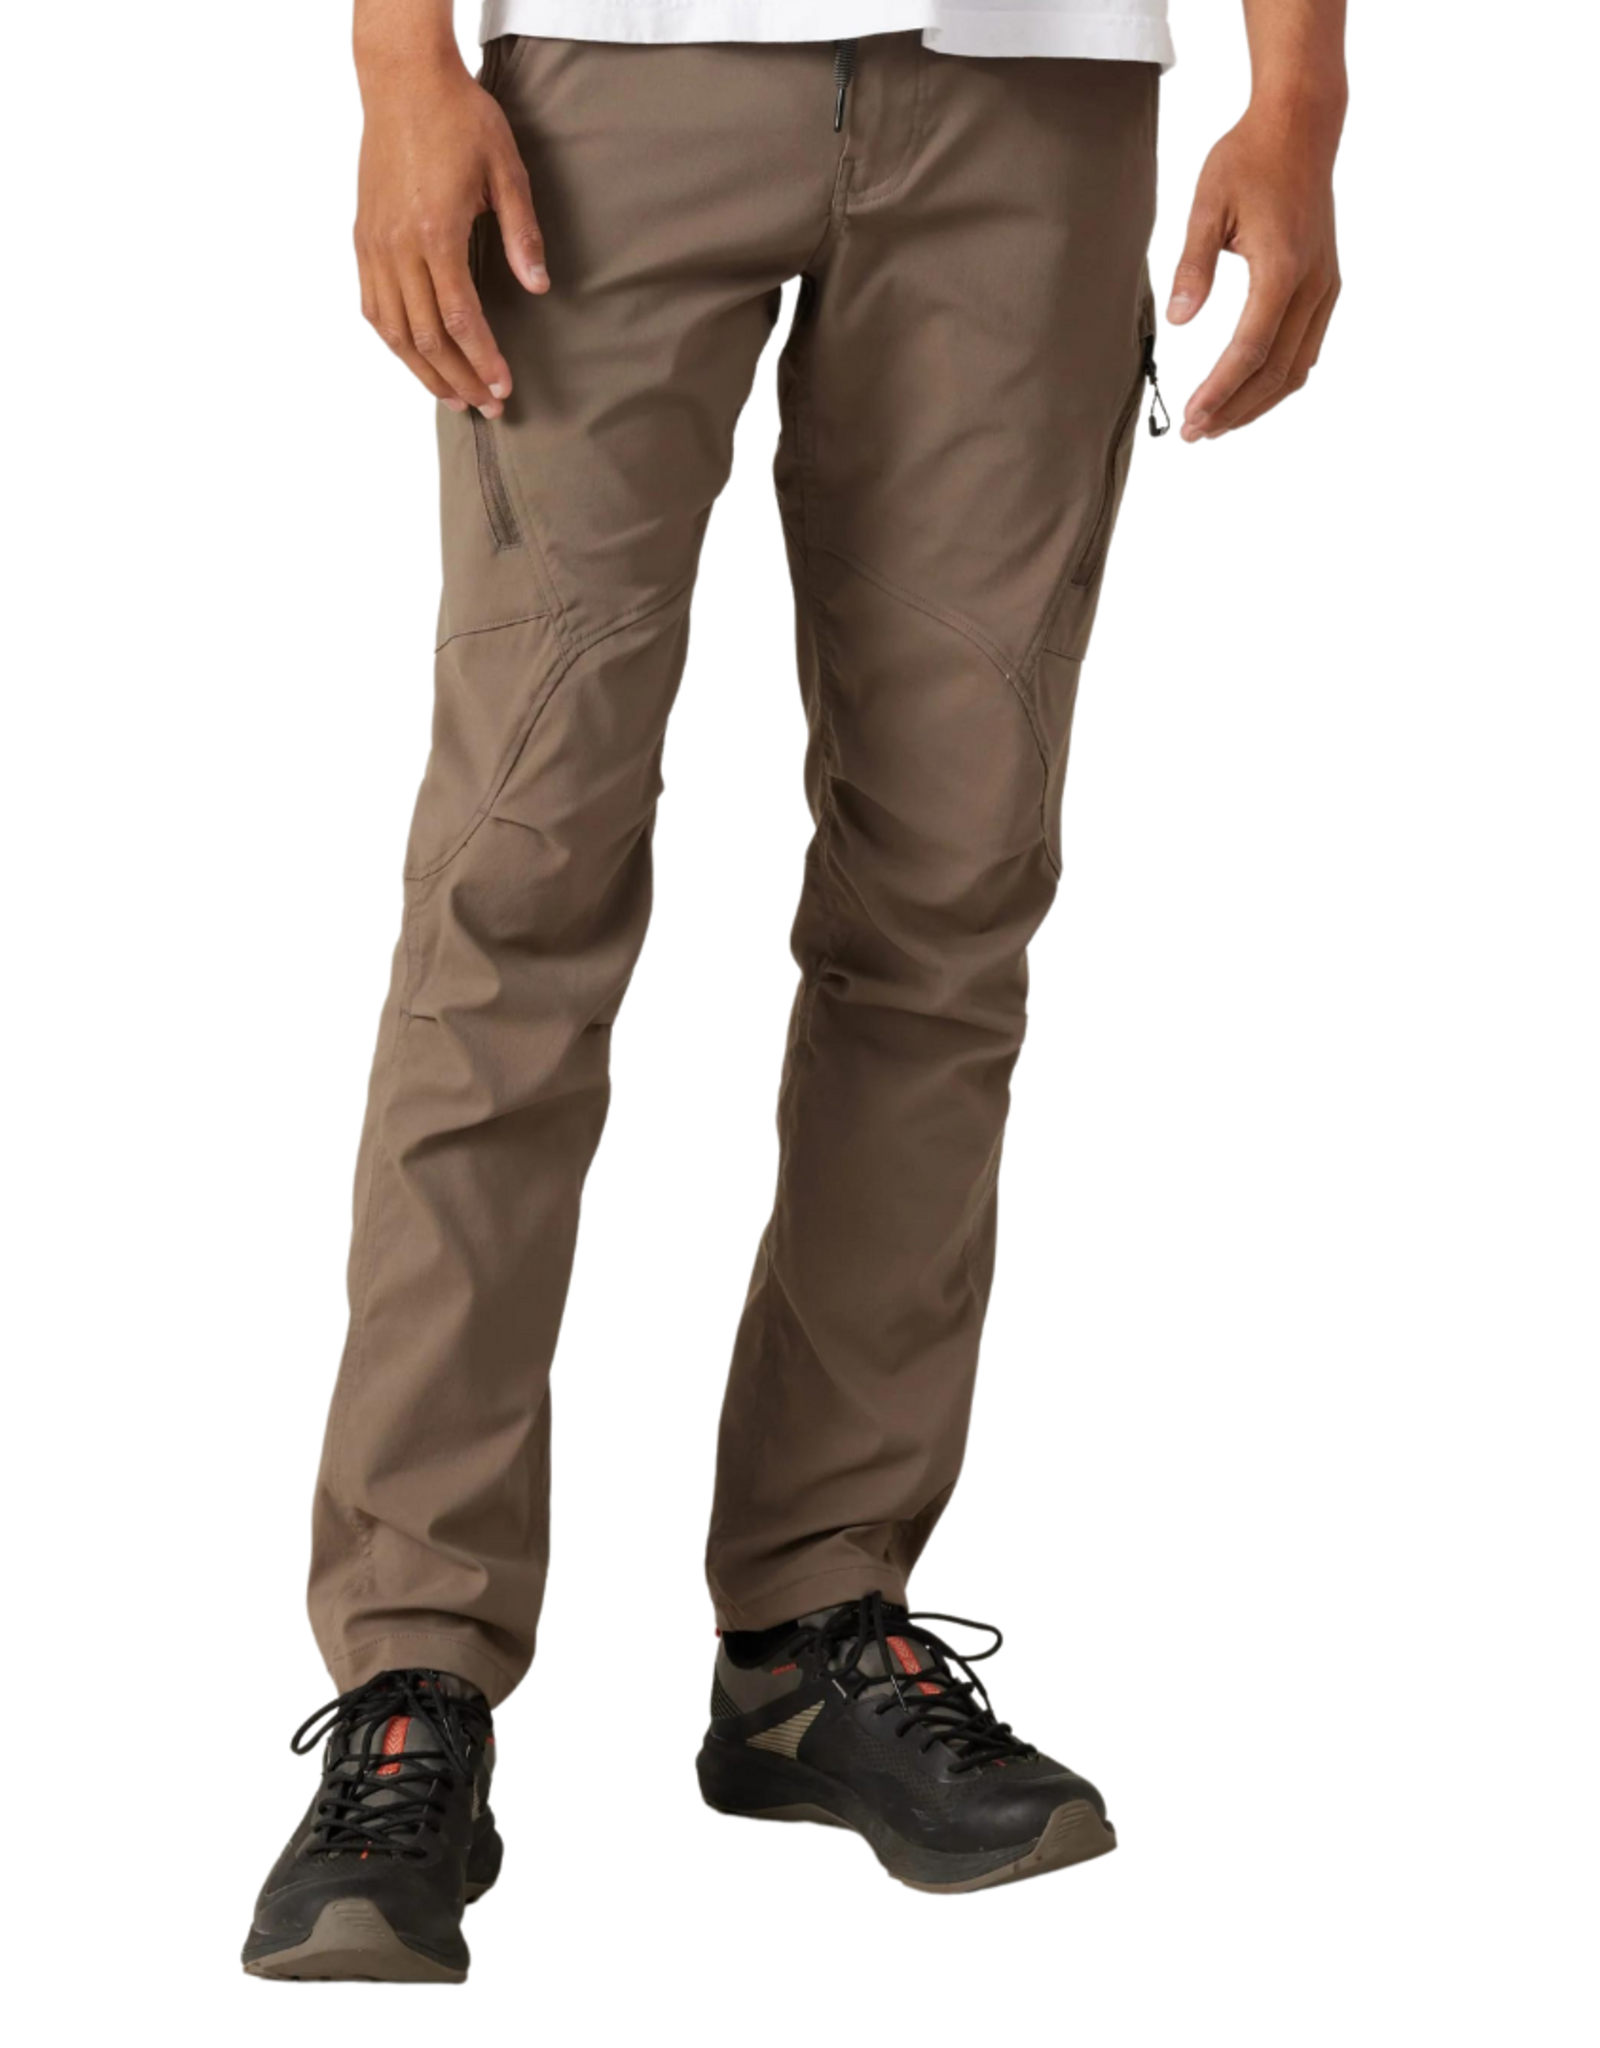 686 OUTERWEAR 686 - MENS ANYTHING CARGO PANT - SLIM